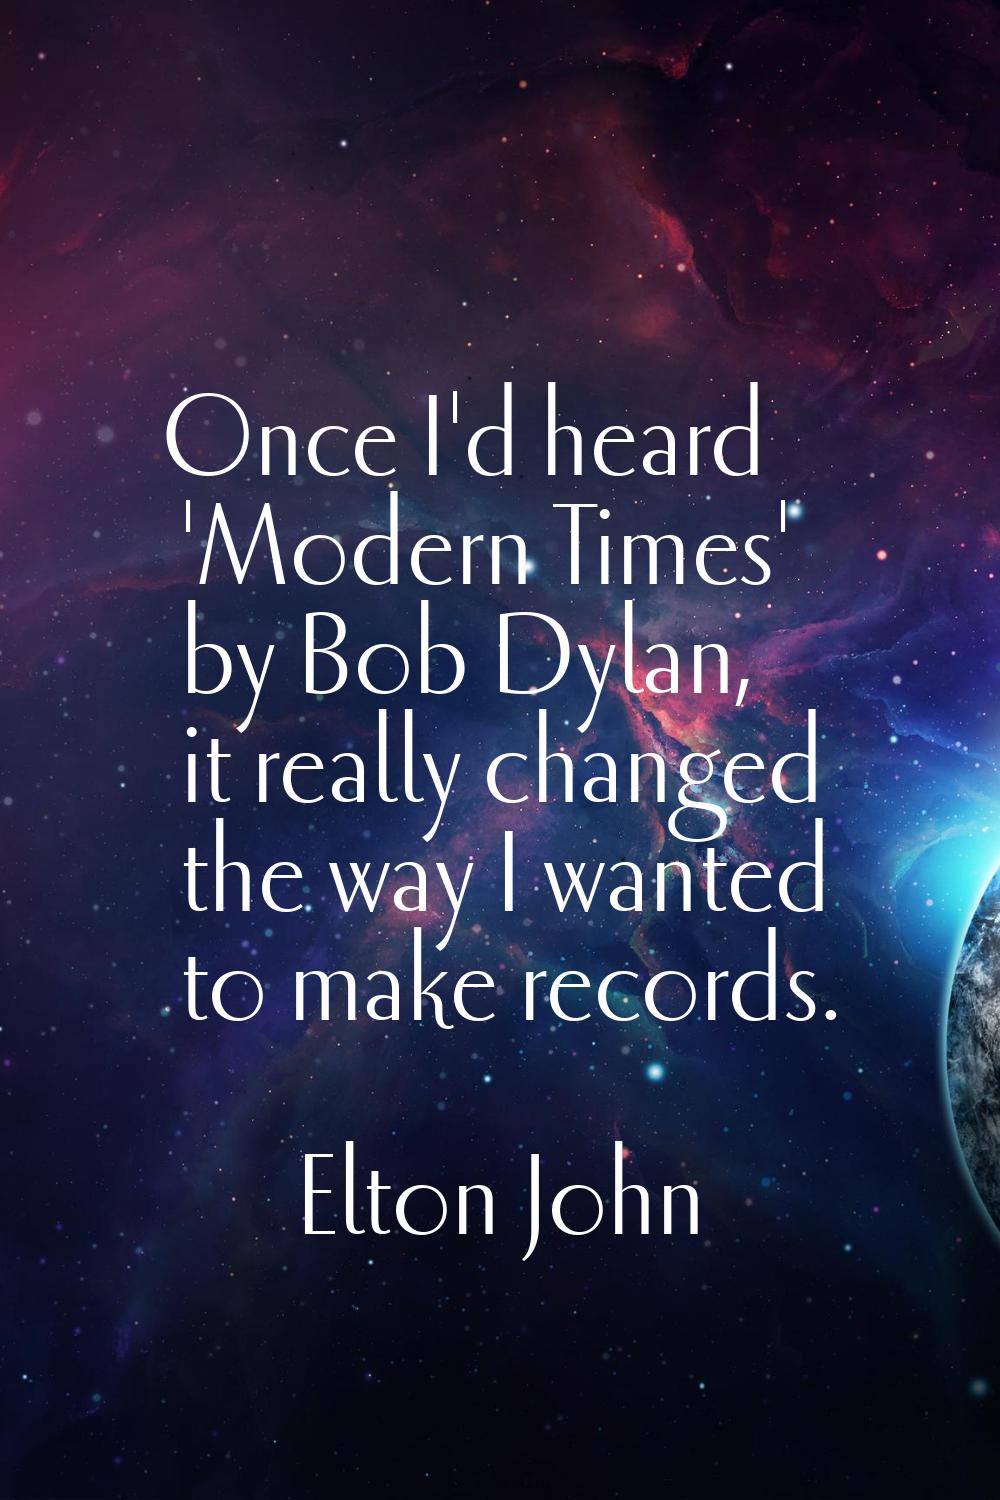 Once I'd heard 'Modern Times' by Bob Dylan, it really changed the way I wanted to make records.